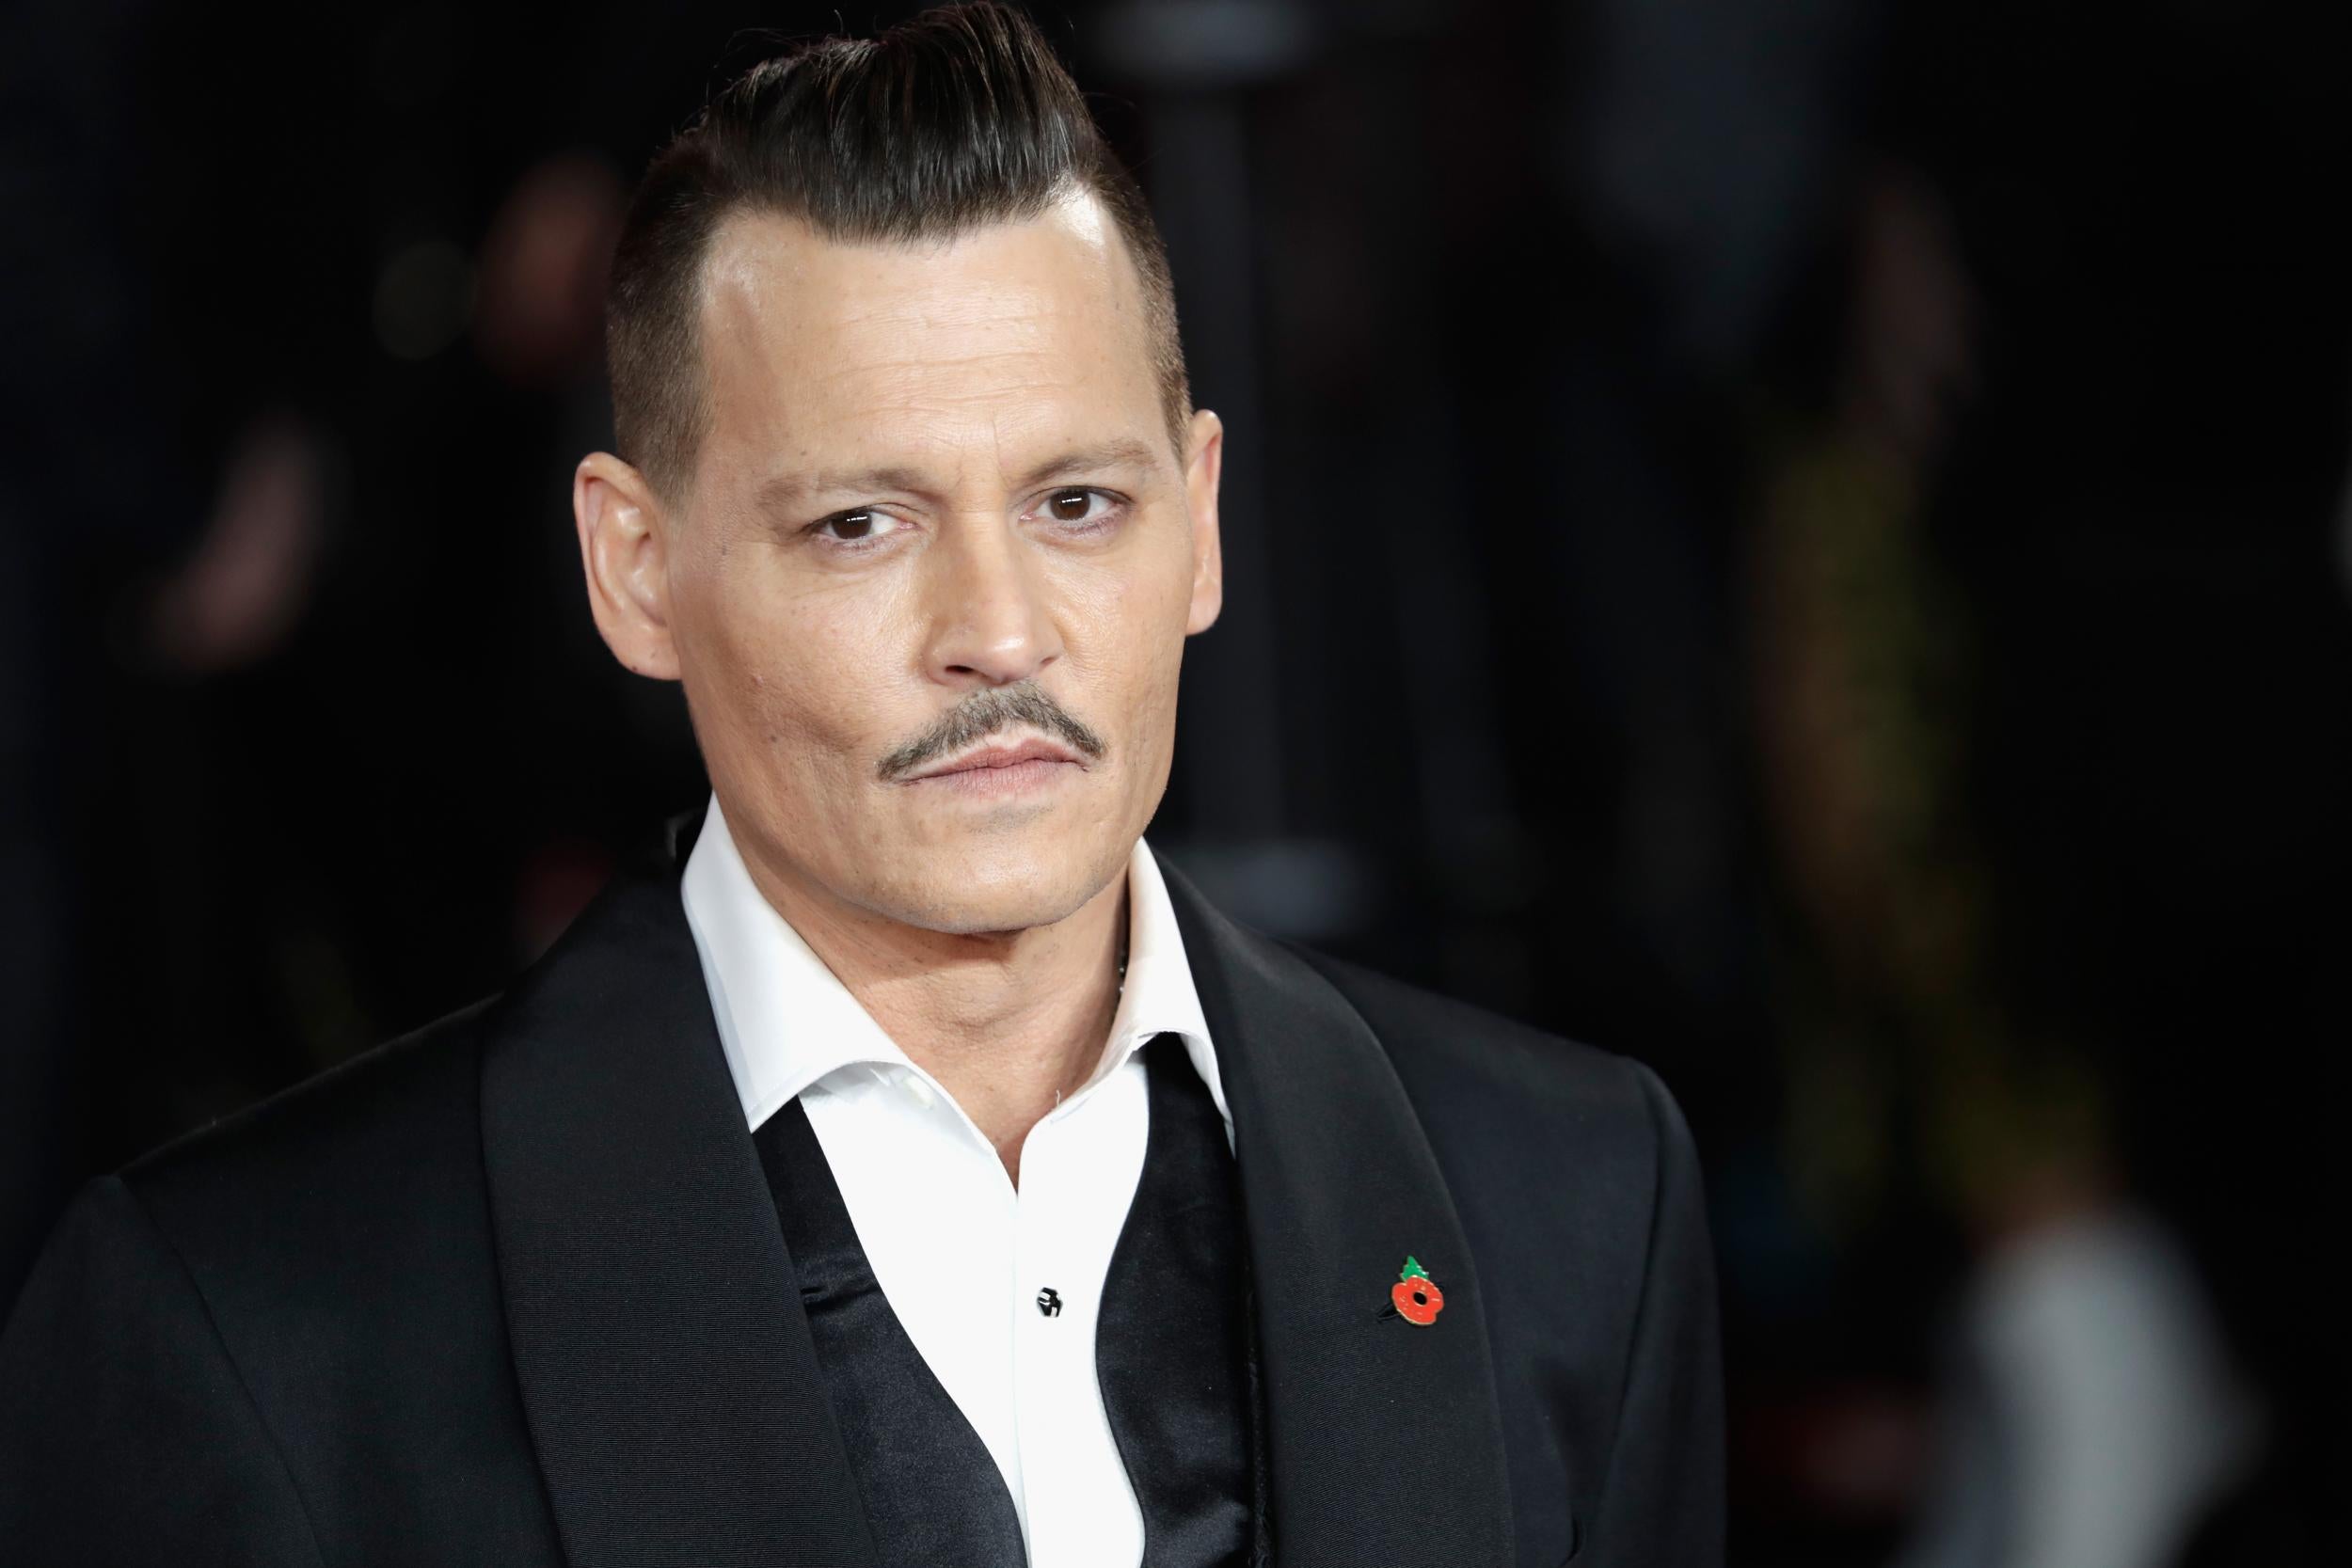 Johnny Depp reveals details of his personal and financial life in new tell-all interview.